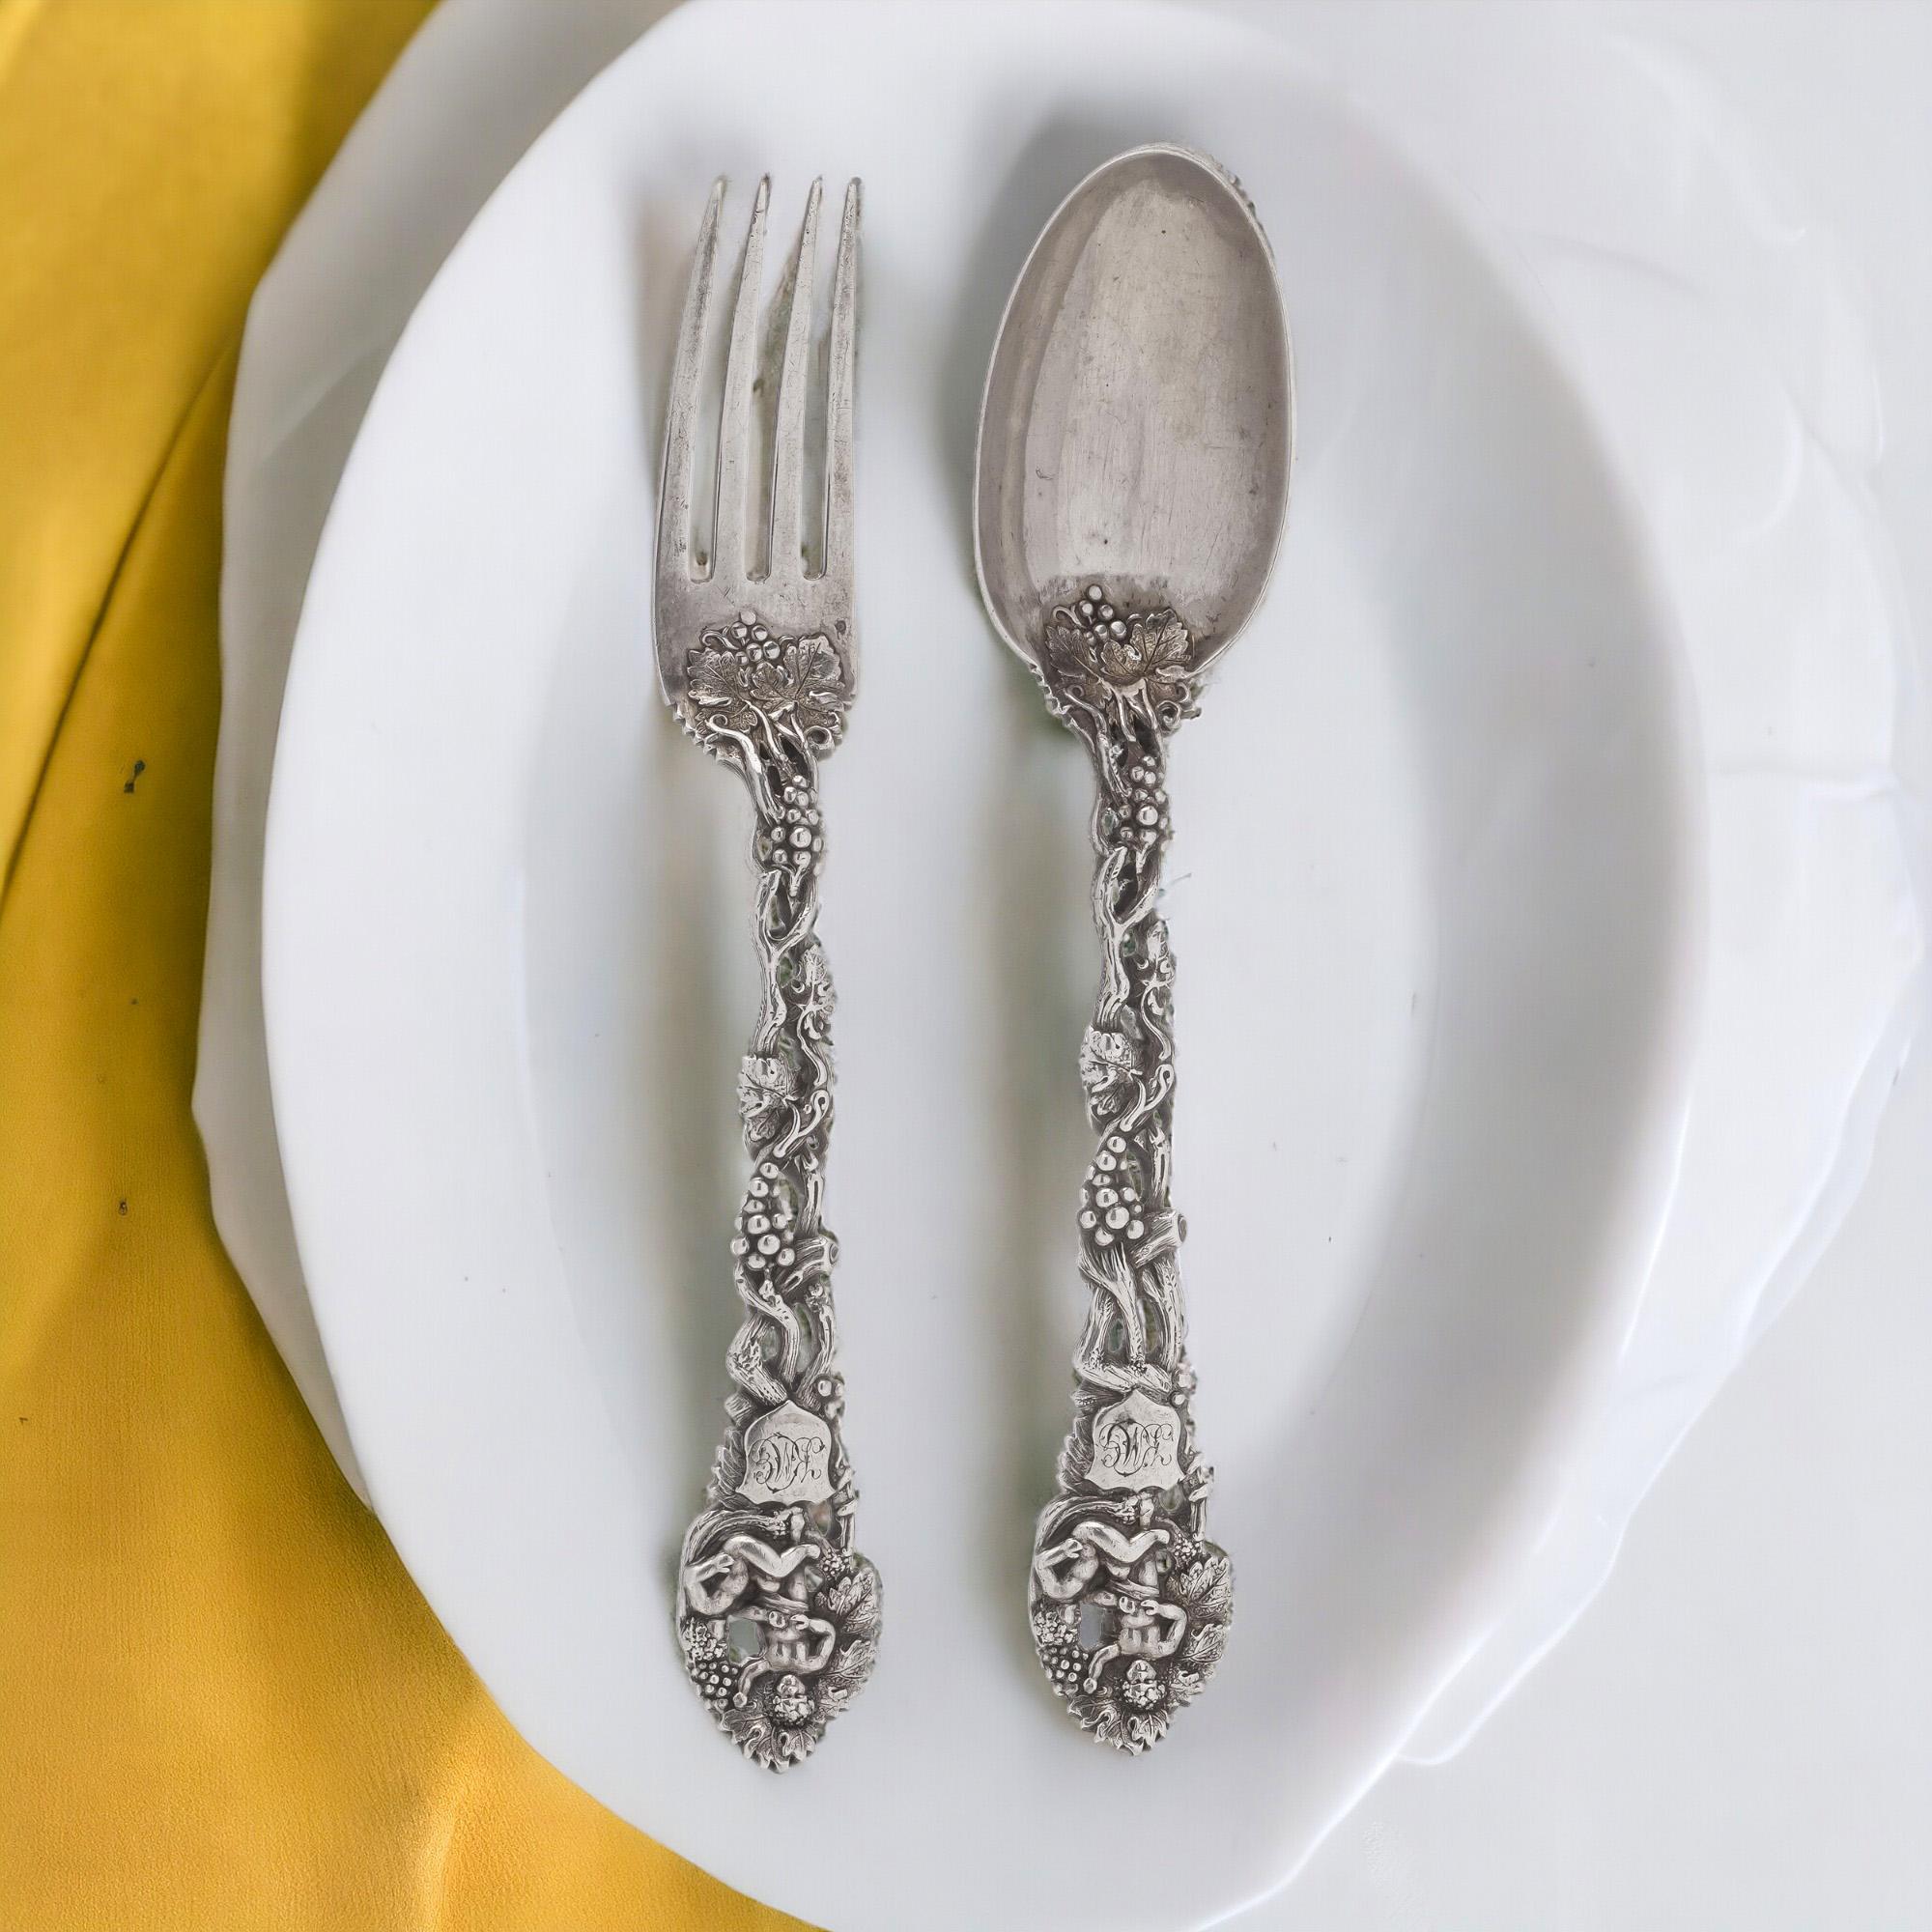 Antique Victorian Sterling silver 925 fruit salad cutlery set of fork and spoon by Chawner & Co (George William Adams). The set is beautifully decorated with two putti and grapevine leaf decorations.The cutlery set bears a monogram.  Made in